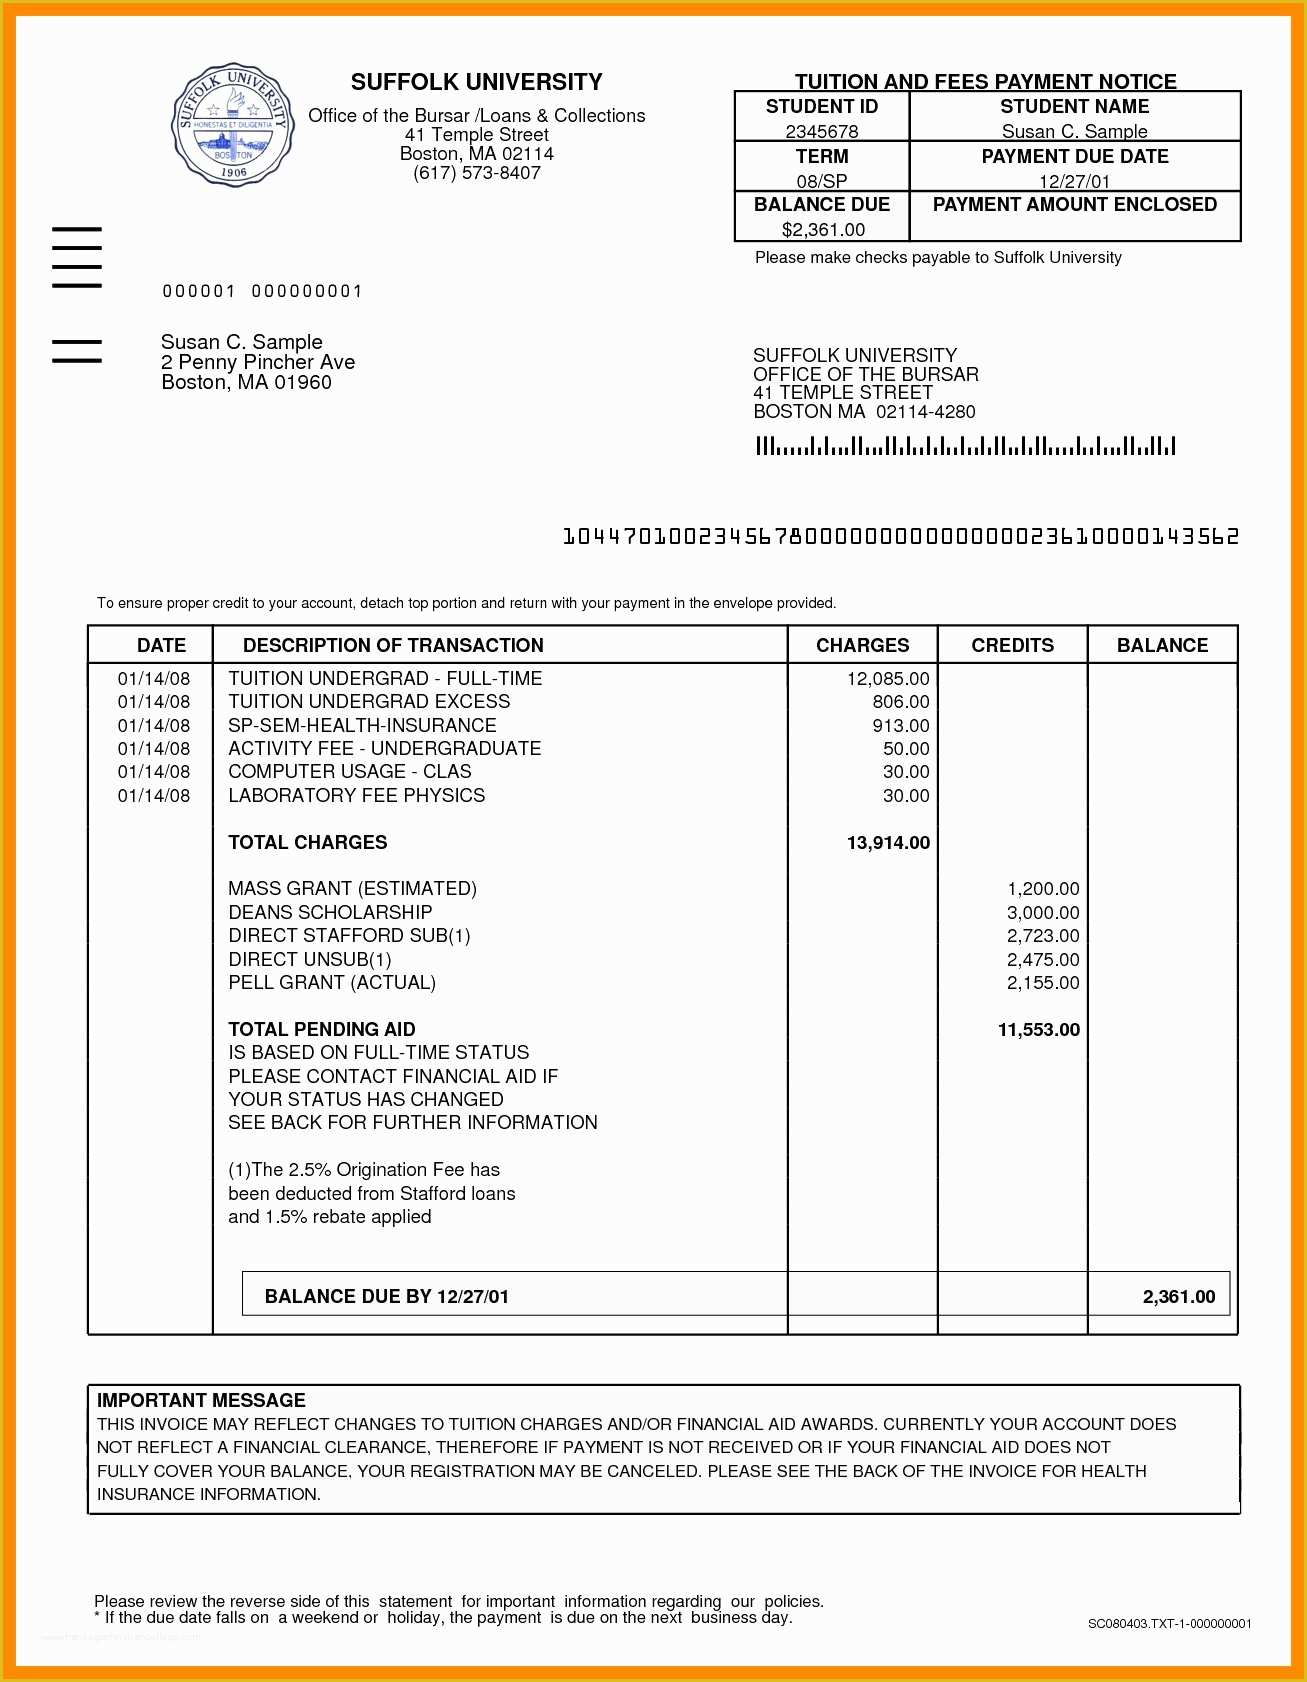 Legal Services Invoice Template Free Of Invoice Template for Legal Services Cbbc827b0c50